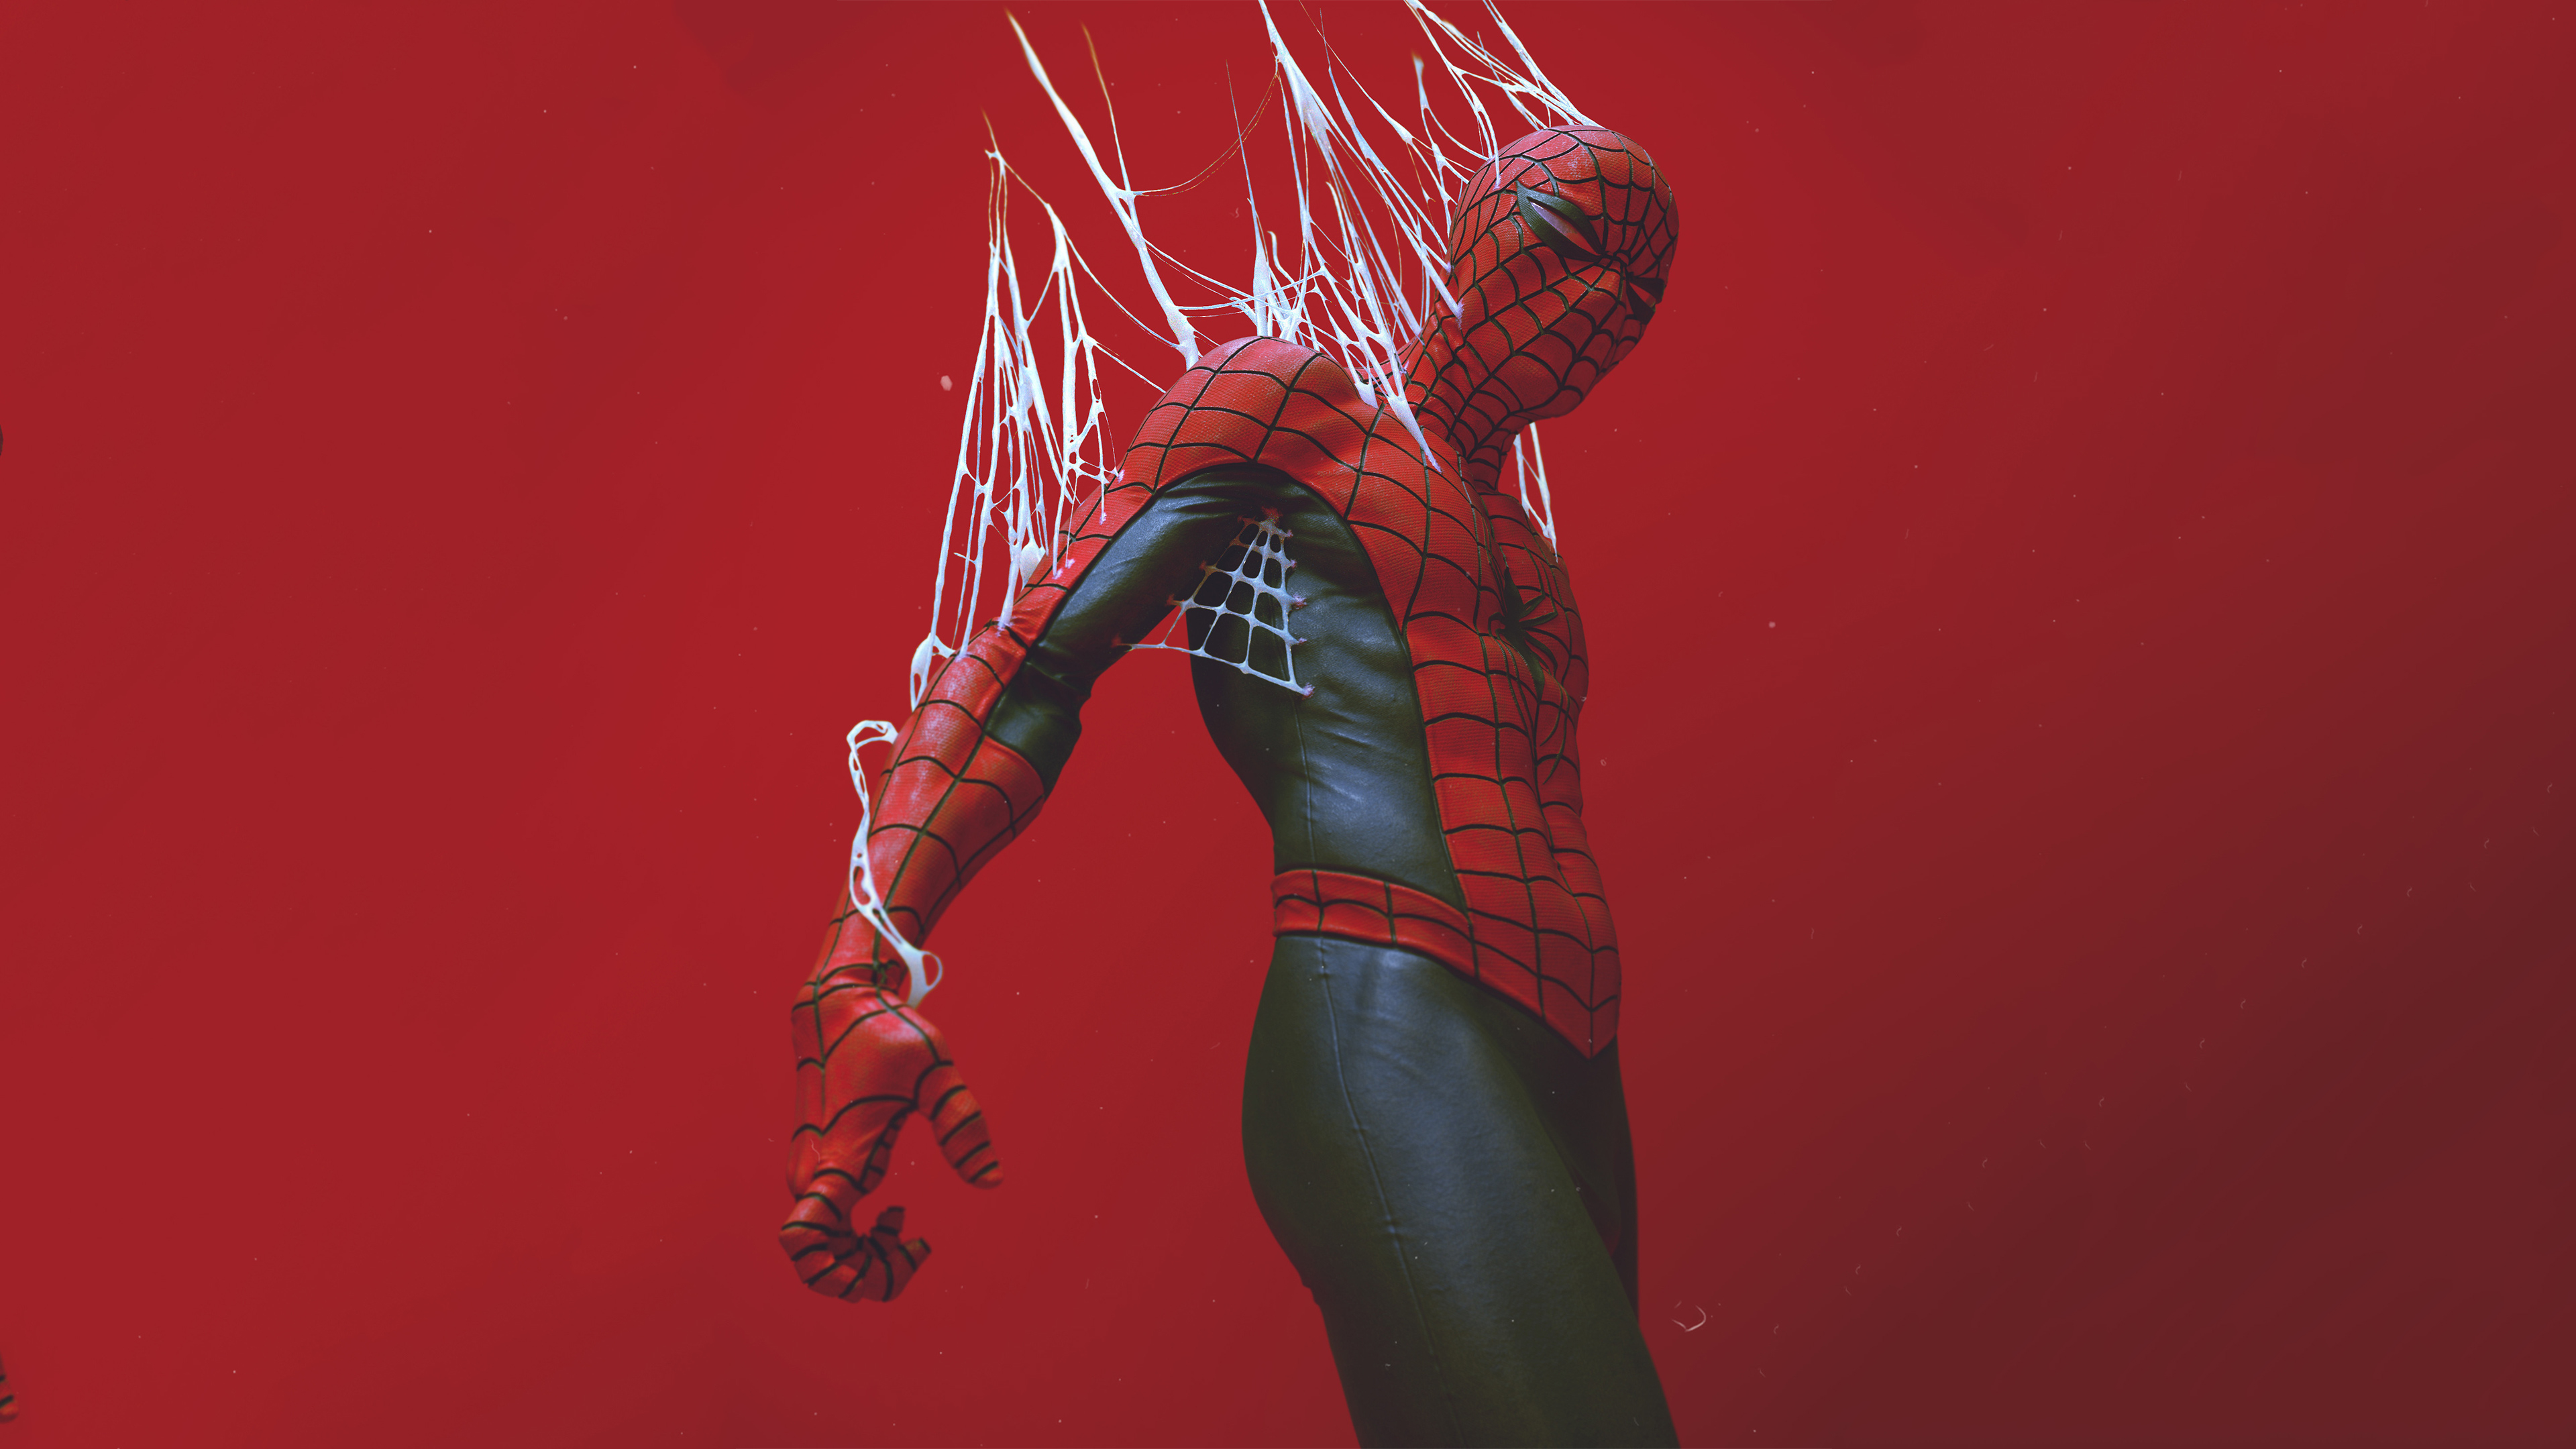 Spider-Man Got Trapped In Web Wallpaper, HD Superheroes 4K Wallpapers